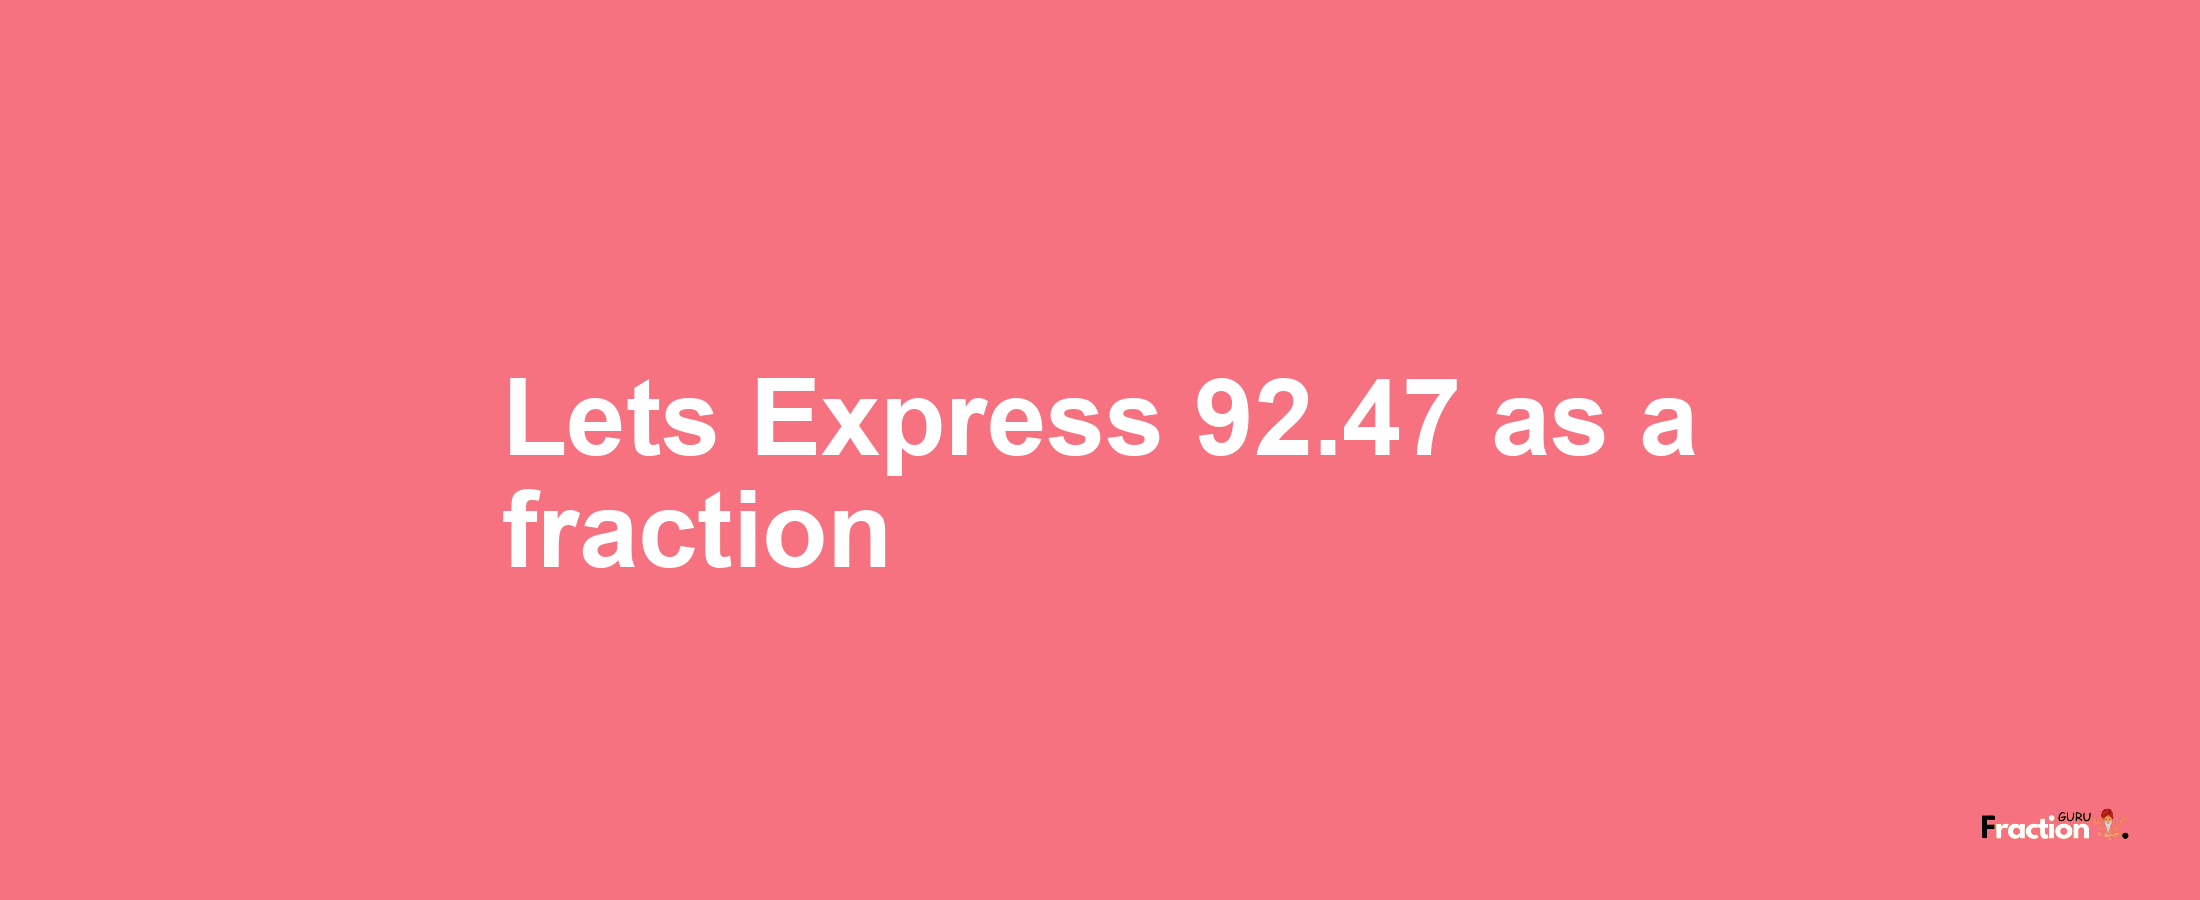 Lets Express 92.47 as afraction